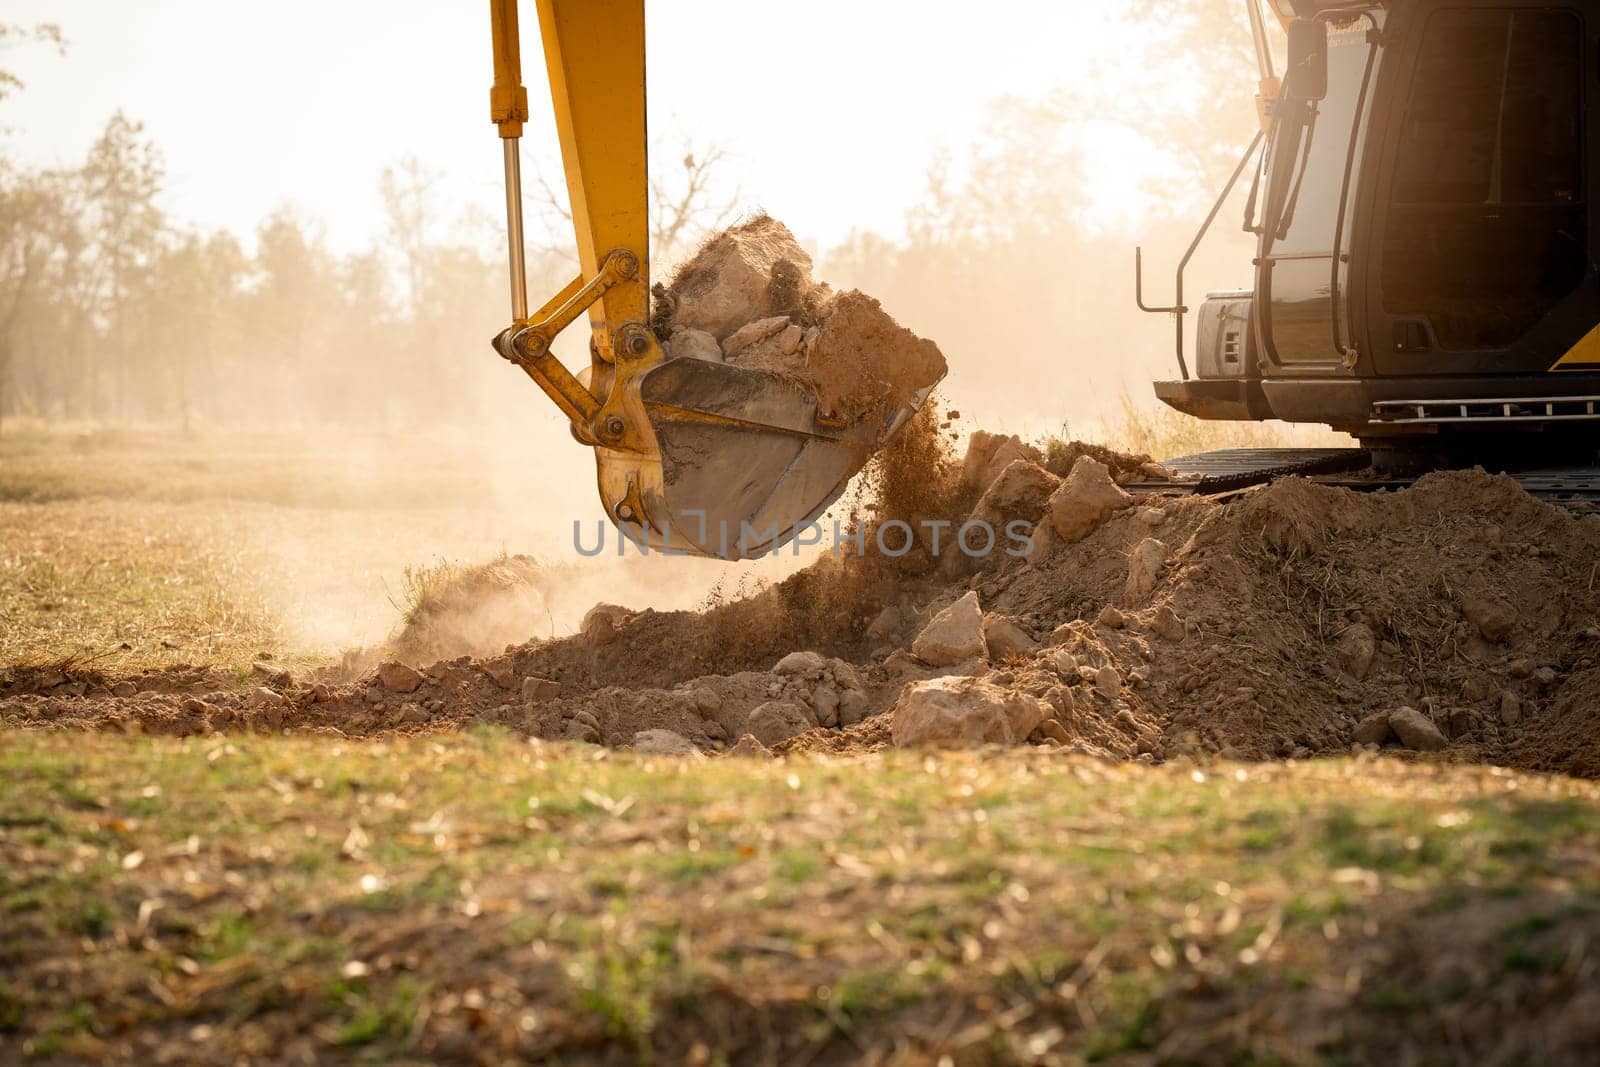 Backhoe working by digging soil at construction site.  Crawler excavator digging on demolition site. Excavating machine. Earth moving machine. Excavation vehicle. Construction business.